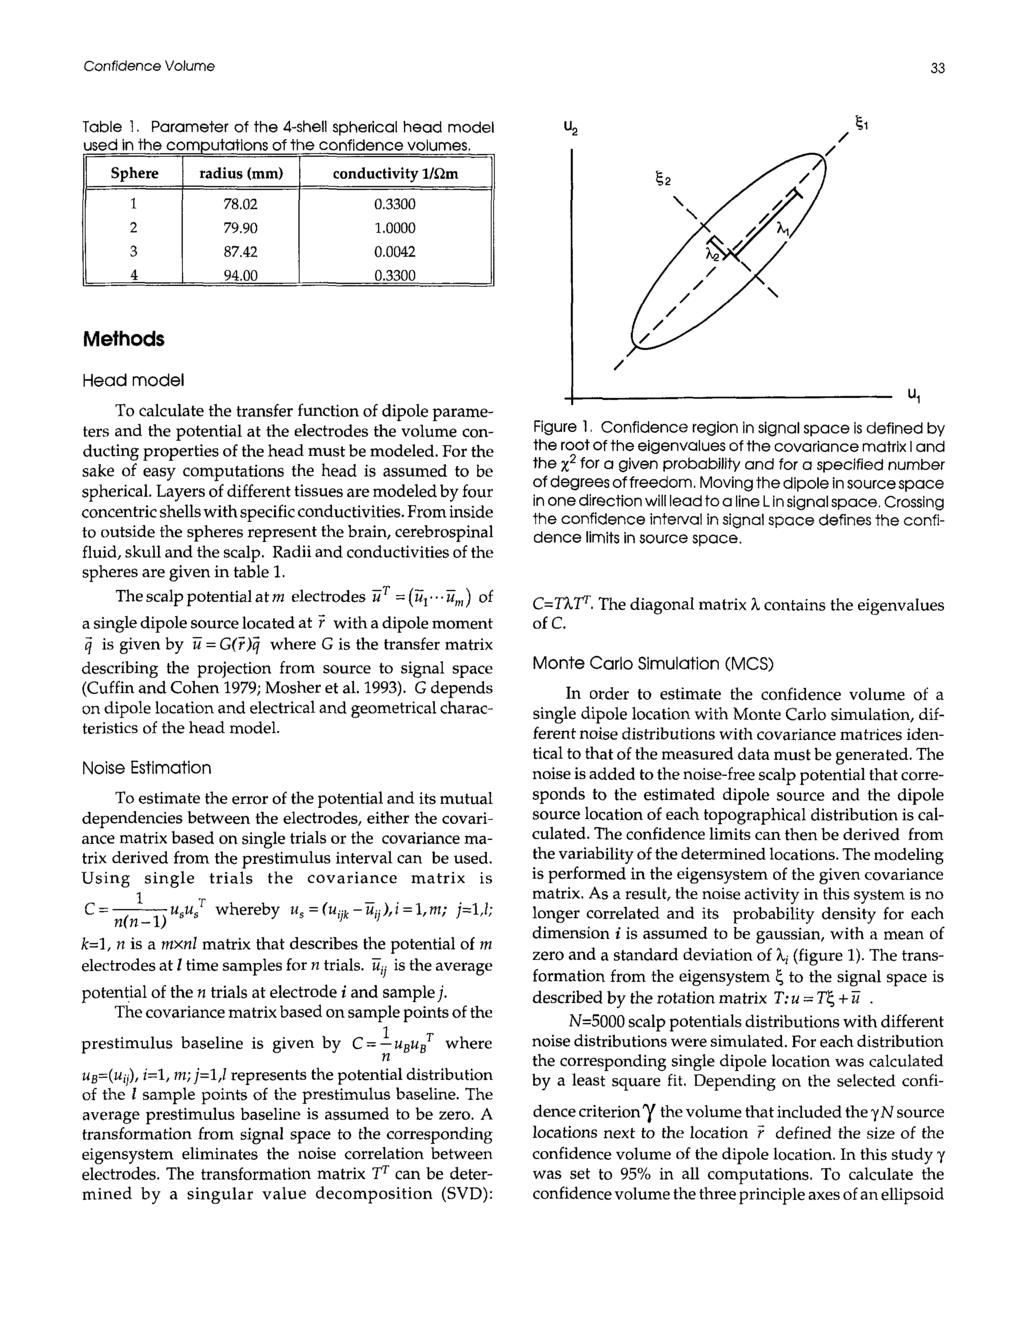 Confidence Volume 33 Table 1. Parameter of the 4shell spherical head model used in the computations of the confidence volumes. Sphere radius (mm) conductivity 1/Om 1 2 3 4 78.02 79.90 87.42 94.00 0.